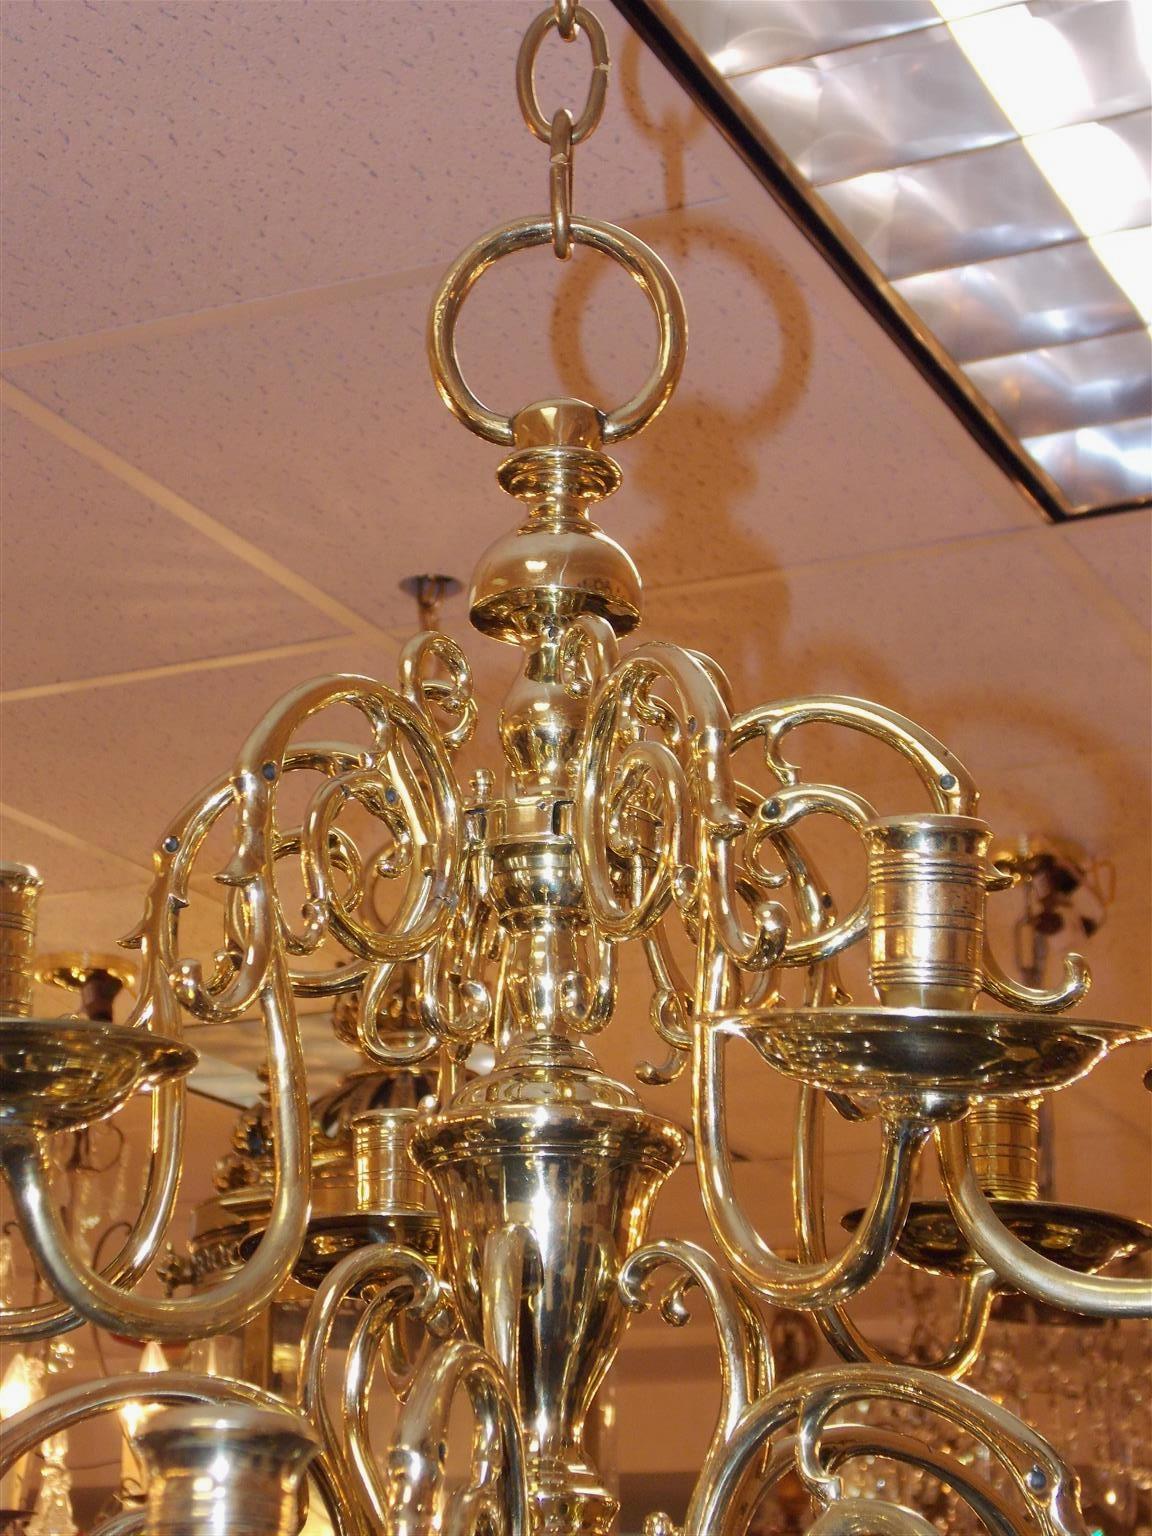 Dutch colonial brass two-tiered twelve light chandelier with scrolled decorative arms, original bobeches, centered bulbous urn column, and terminating on a lower large ball with ring finial. Candle powered and can be electrified if desired, Mid-18th